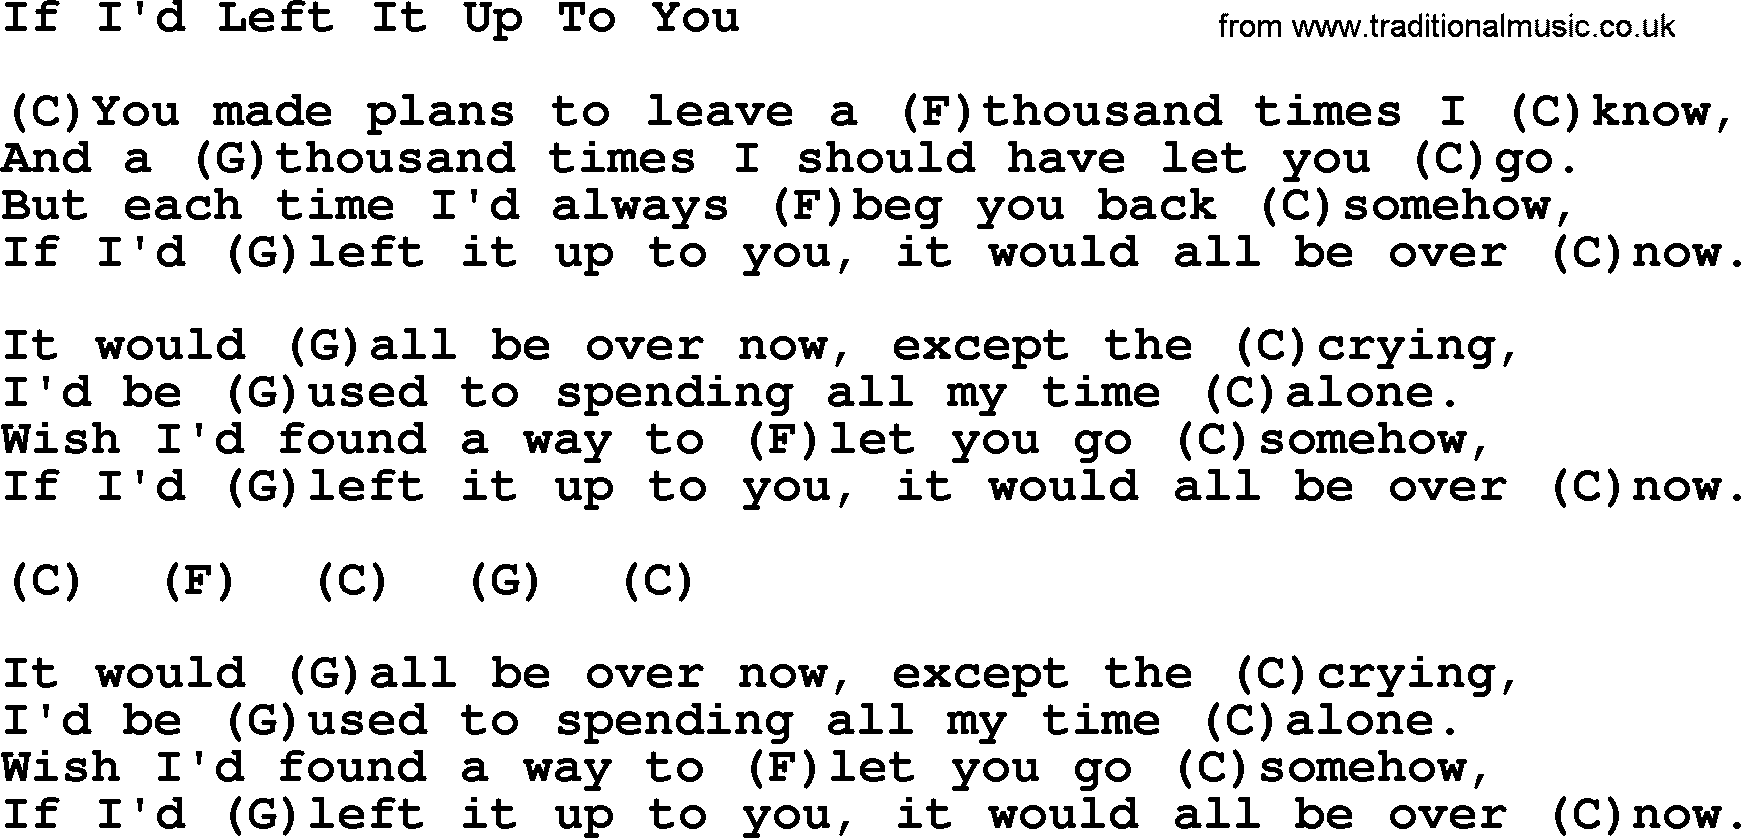 Merle Haggard song: If I'd Left It Up To You, lyrics and chords